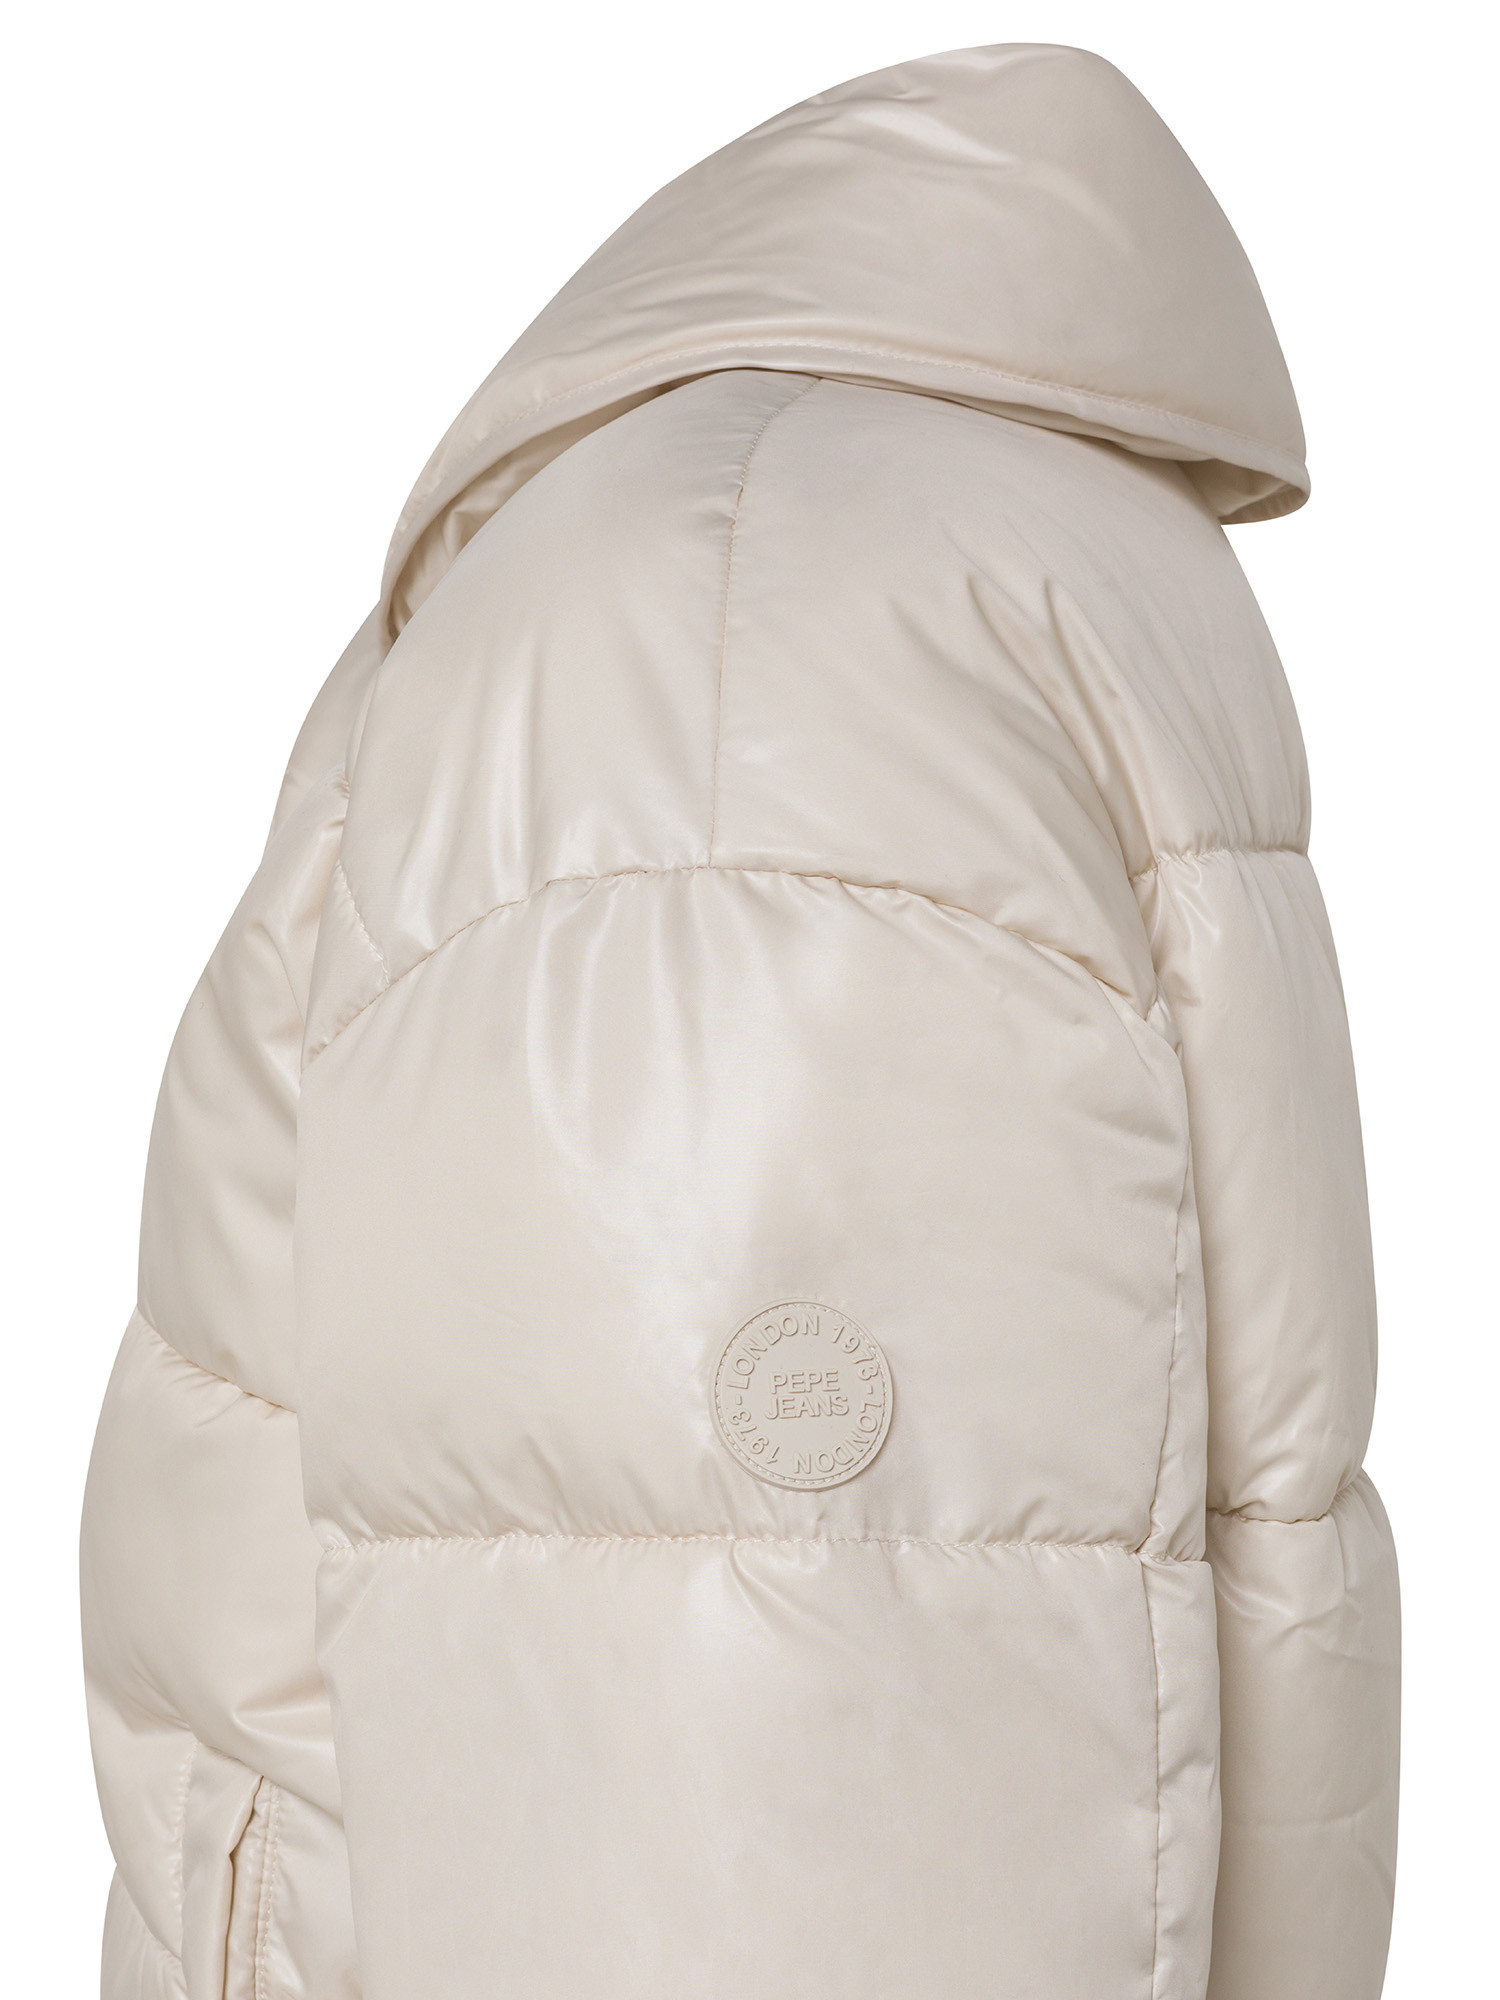 Pepe Jeans - Cropped down jacket in shiny fabric, Cream, large image number 2